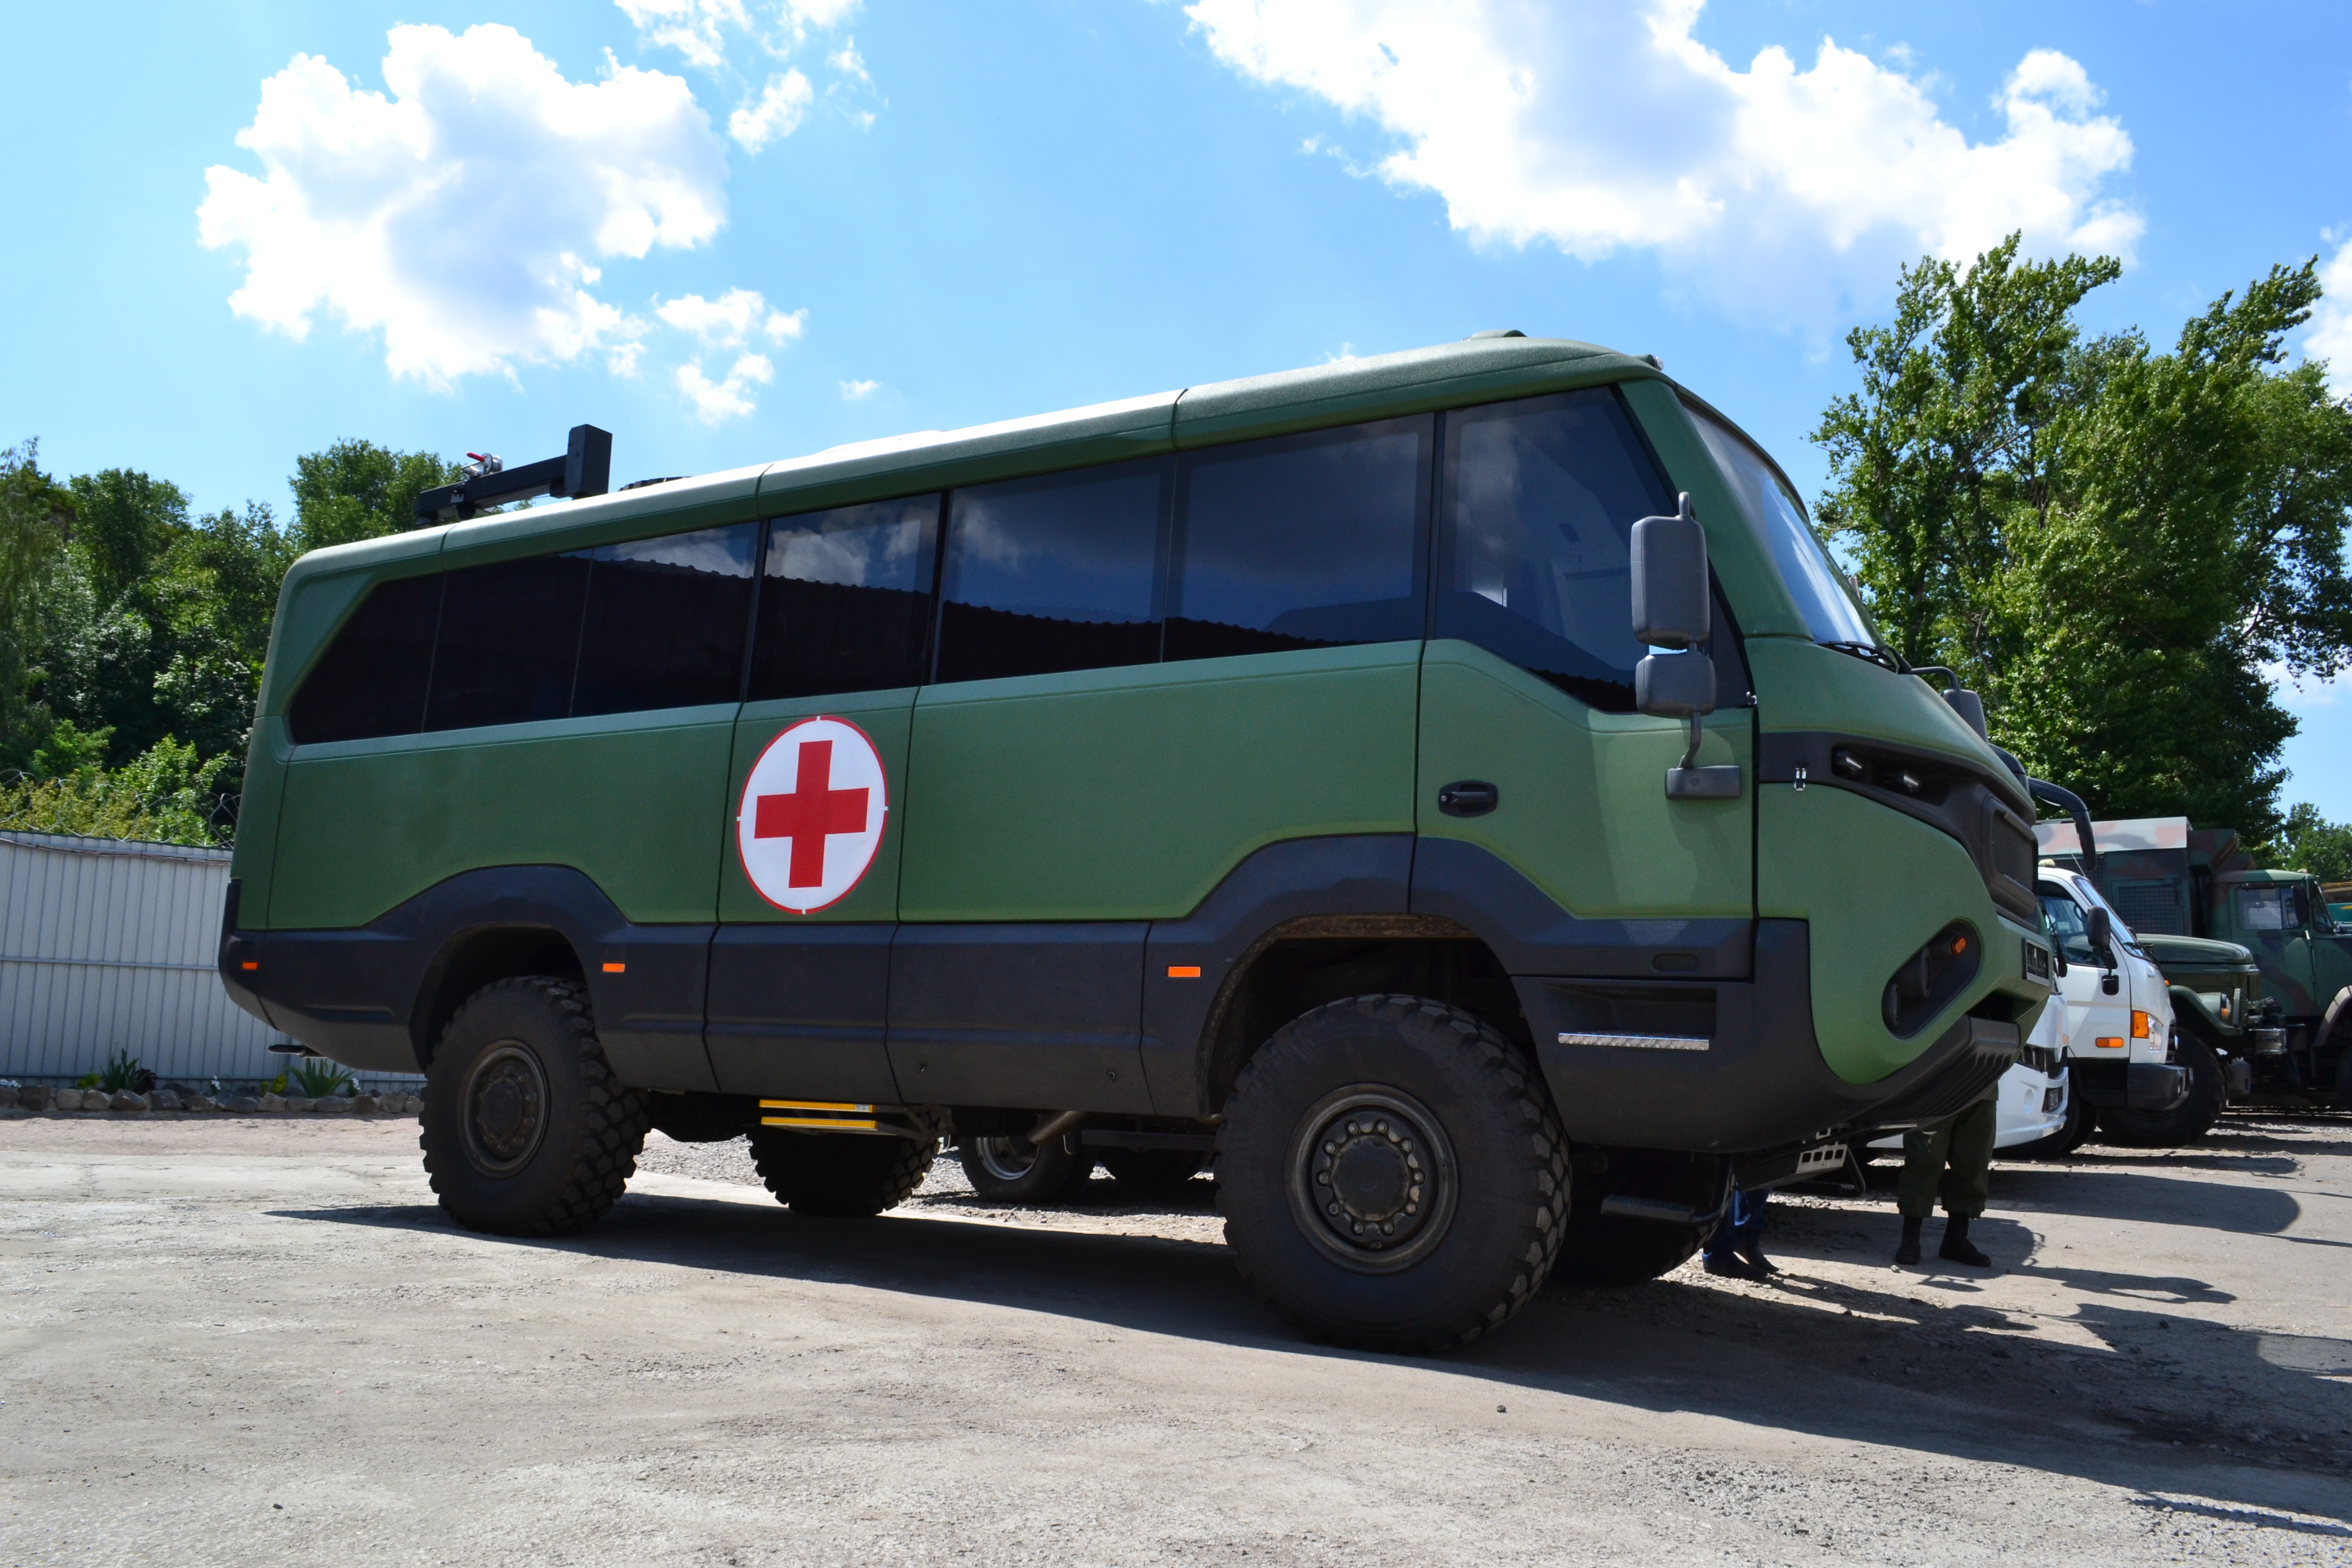 An ambulance version of the Tursus Praetorian bus sold to the National Guard of Ukraine. Its creators claim it can fit up to 12 wounded patients and some medical staff. (Torsus)